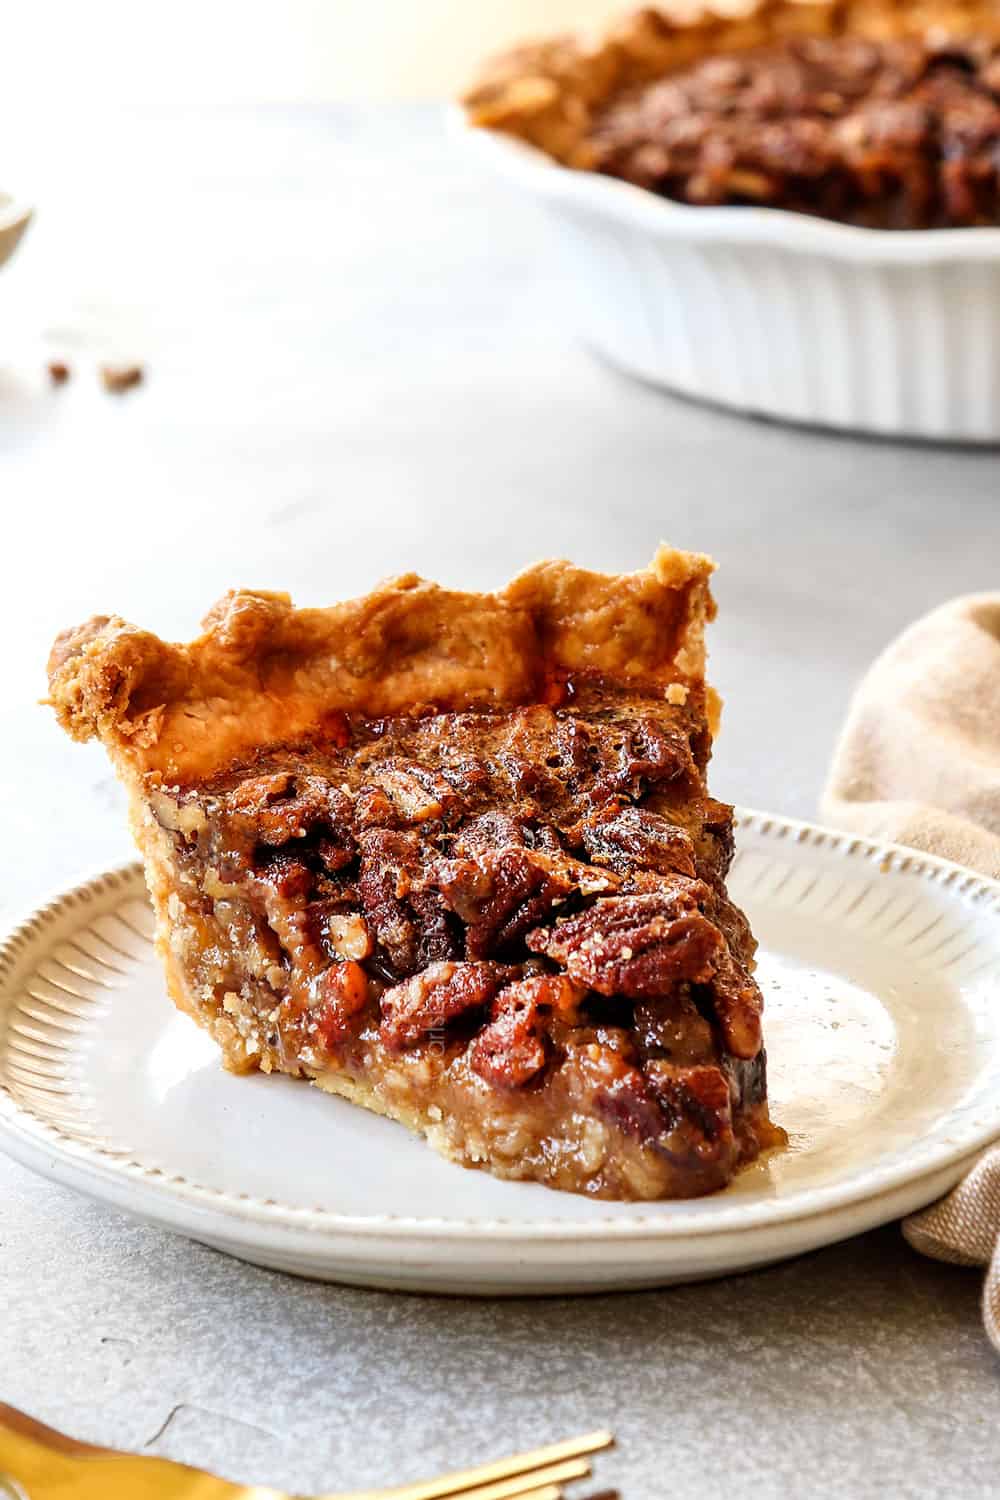 a slice of homemade pecan pie on a plate